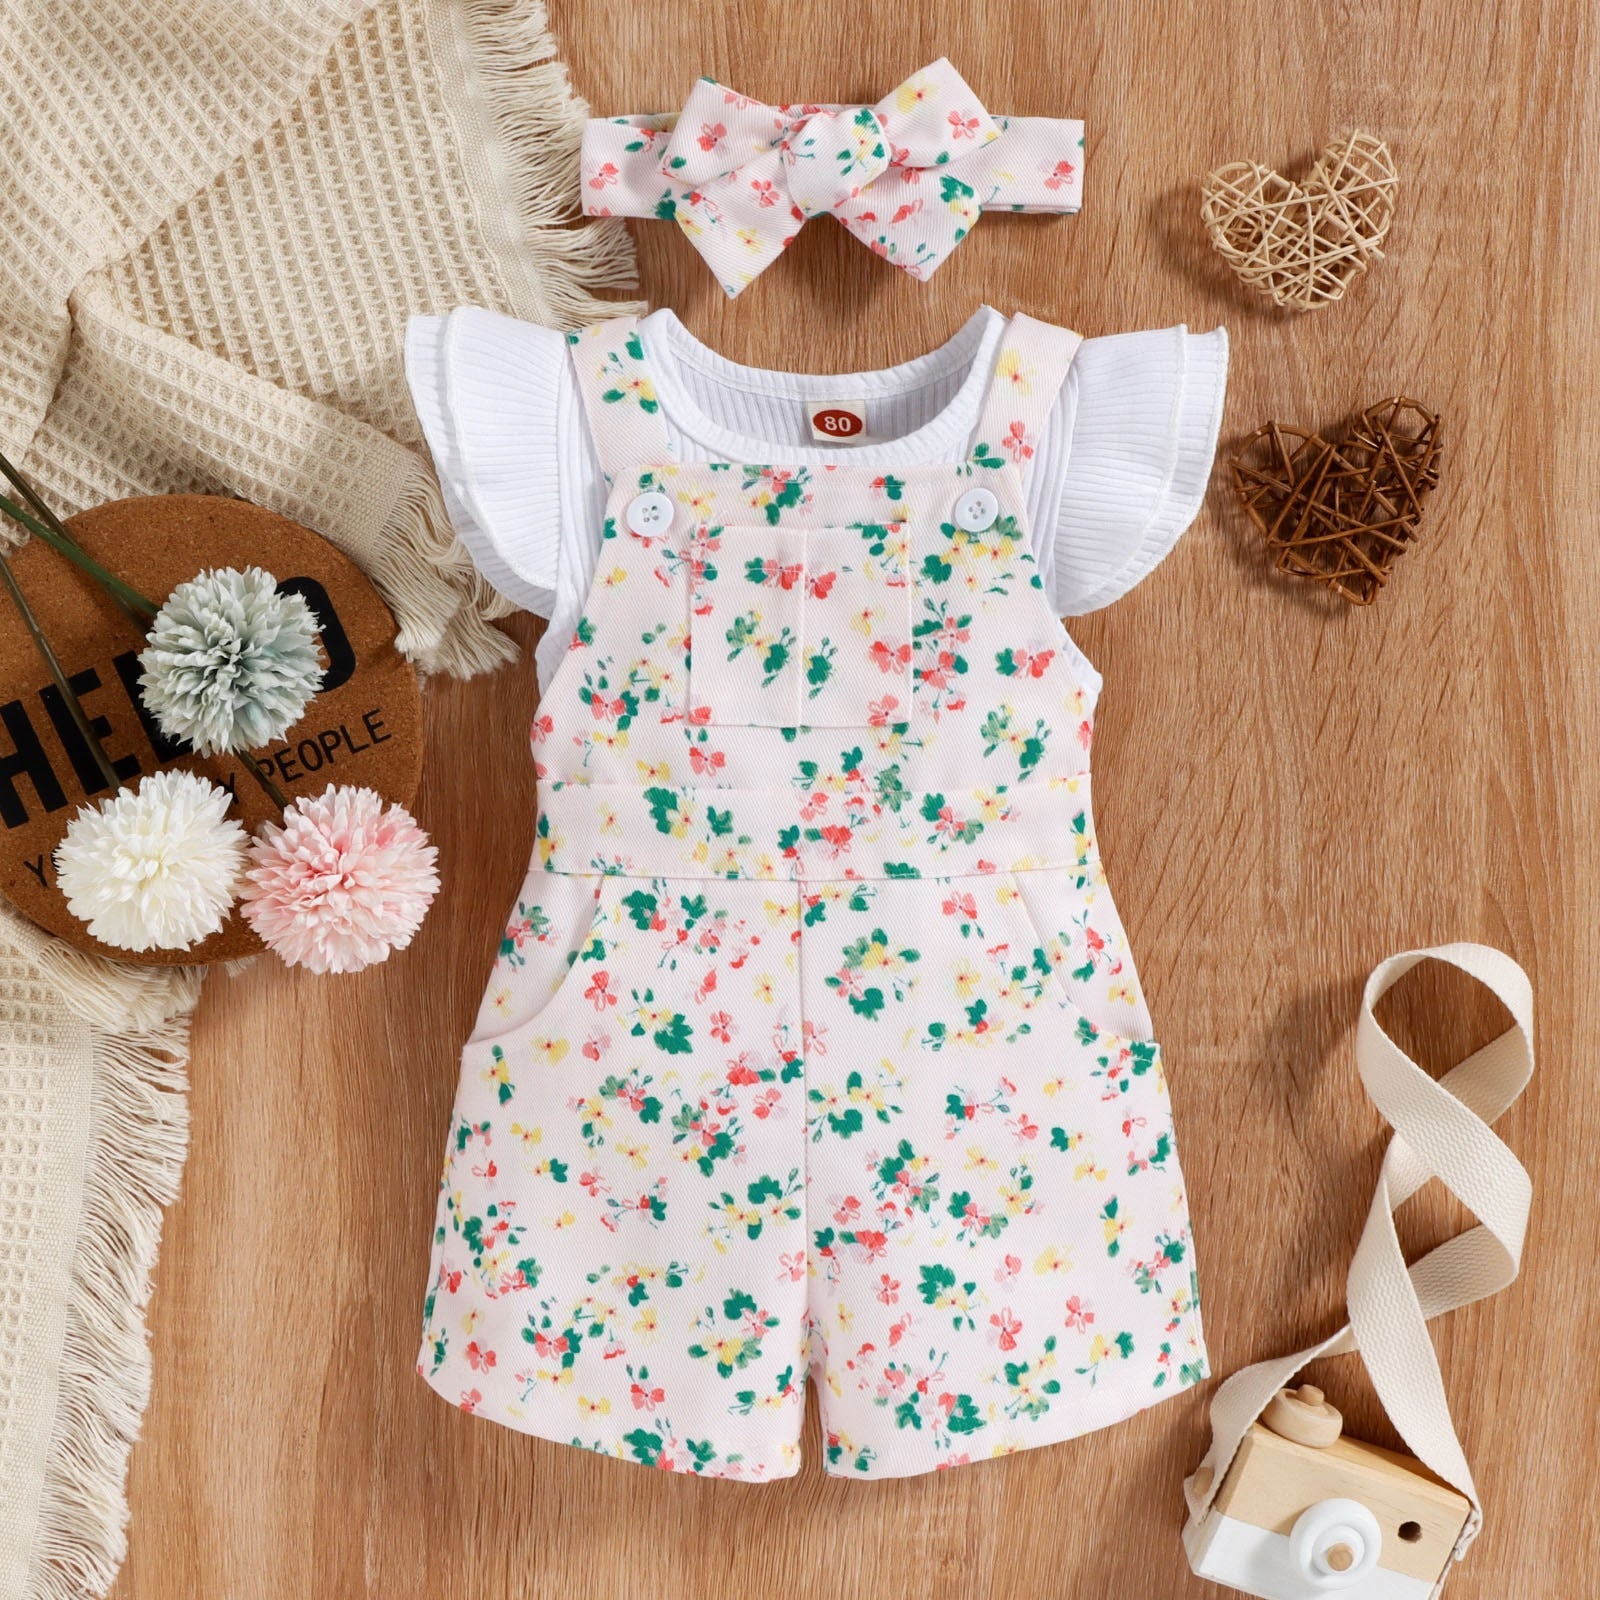 Adorable Infant Baby Girls Clothes Sets with Fly Sleeve Plain Tees and Floral Suspender Shorts